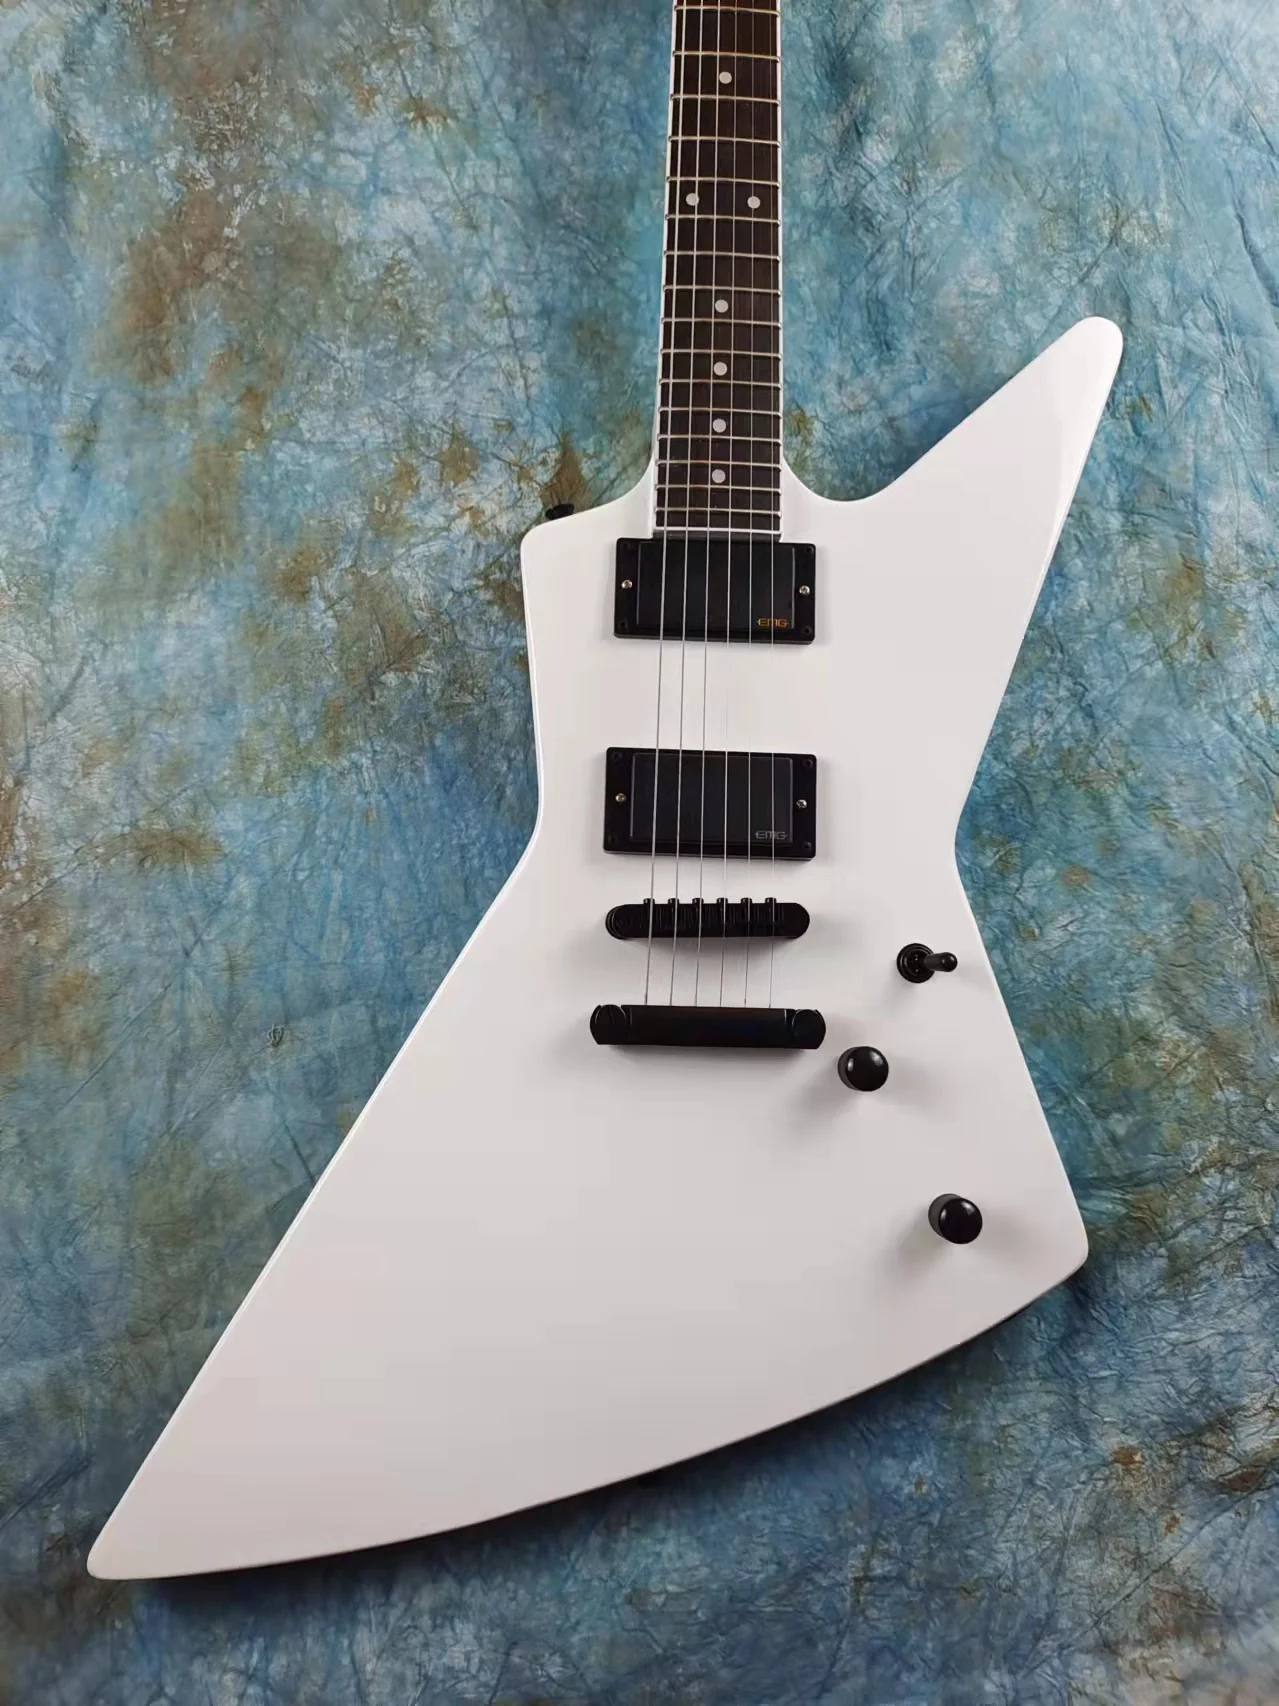 

Shaped Electric guitar, white, EMG active pickup, mahogany, rosewood fingerboard, white pearl inlay, available, including mail